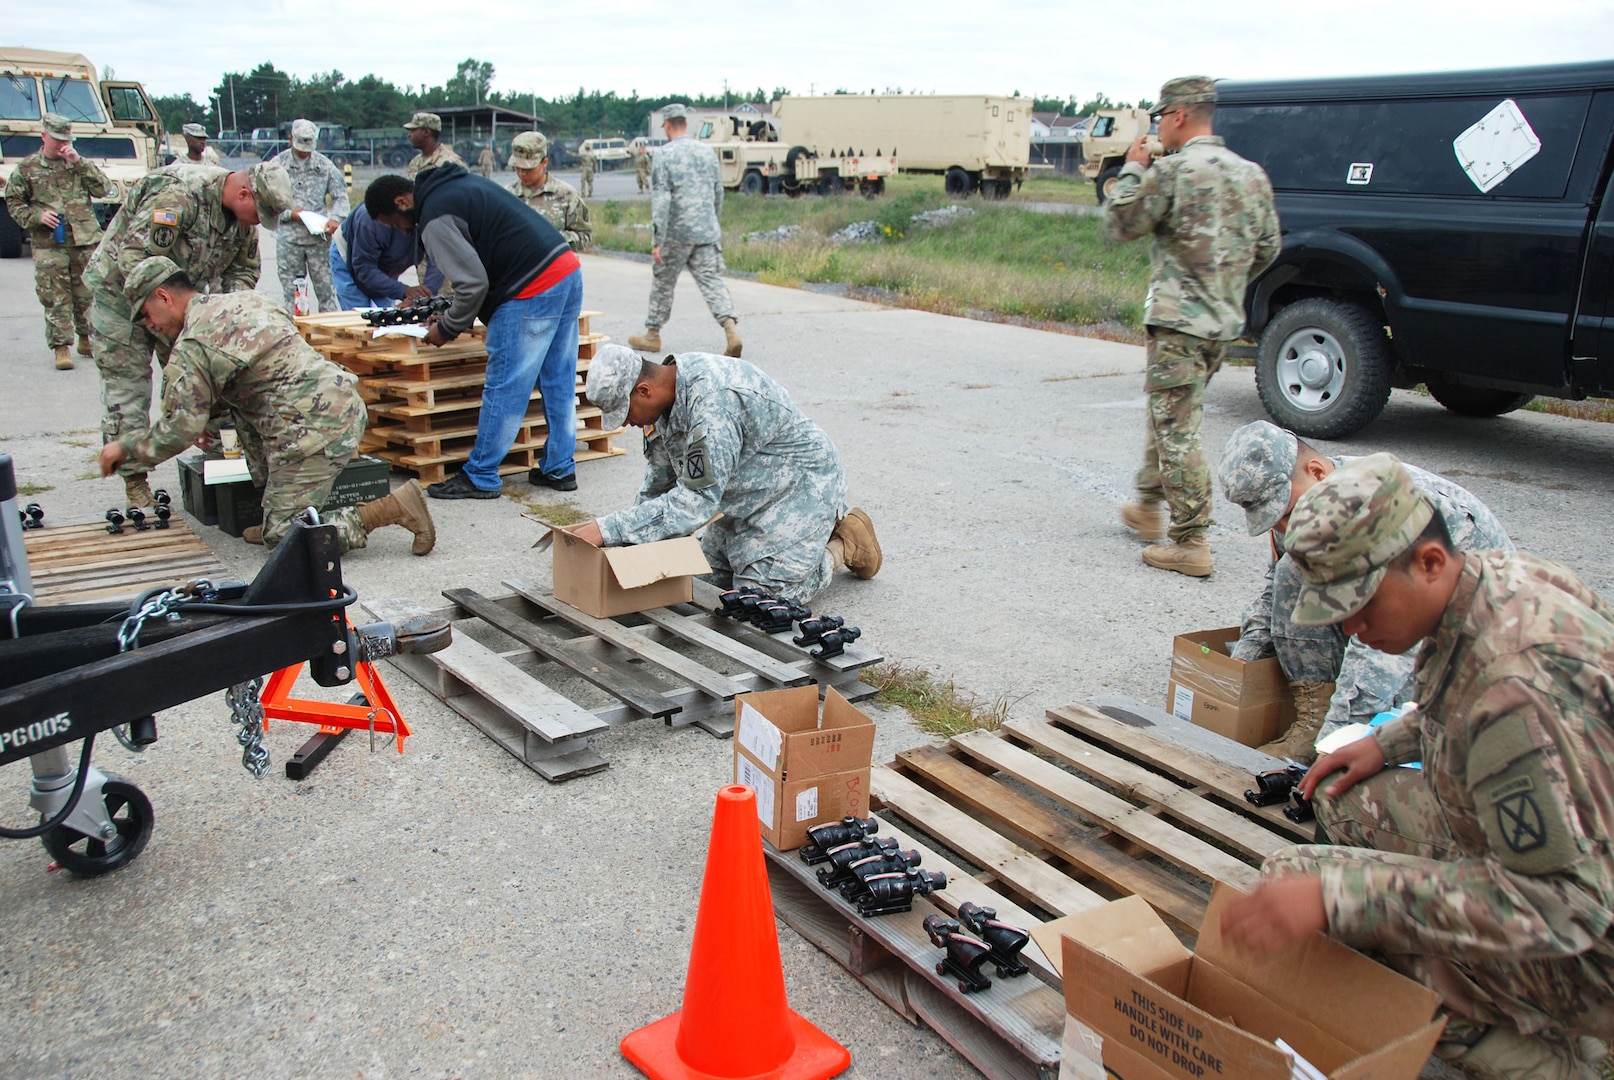 DLA Distribution is repairing and storing excess equipment for units throughout the Army so soldiers can focus on mission-essential equipment and readiness.